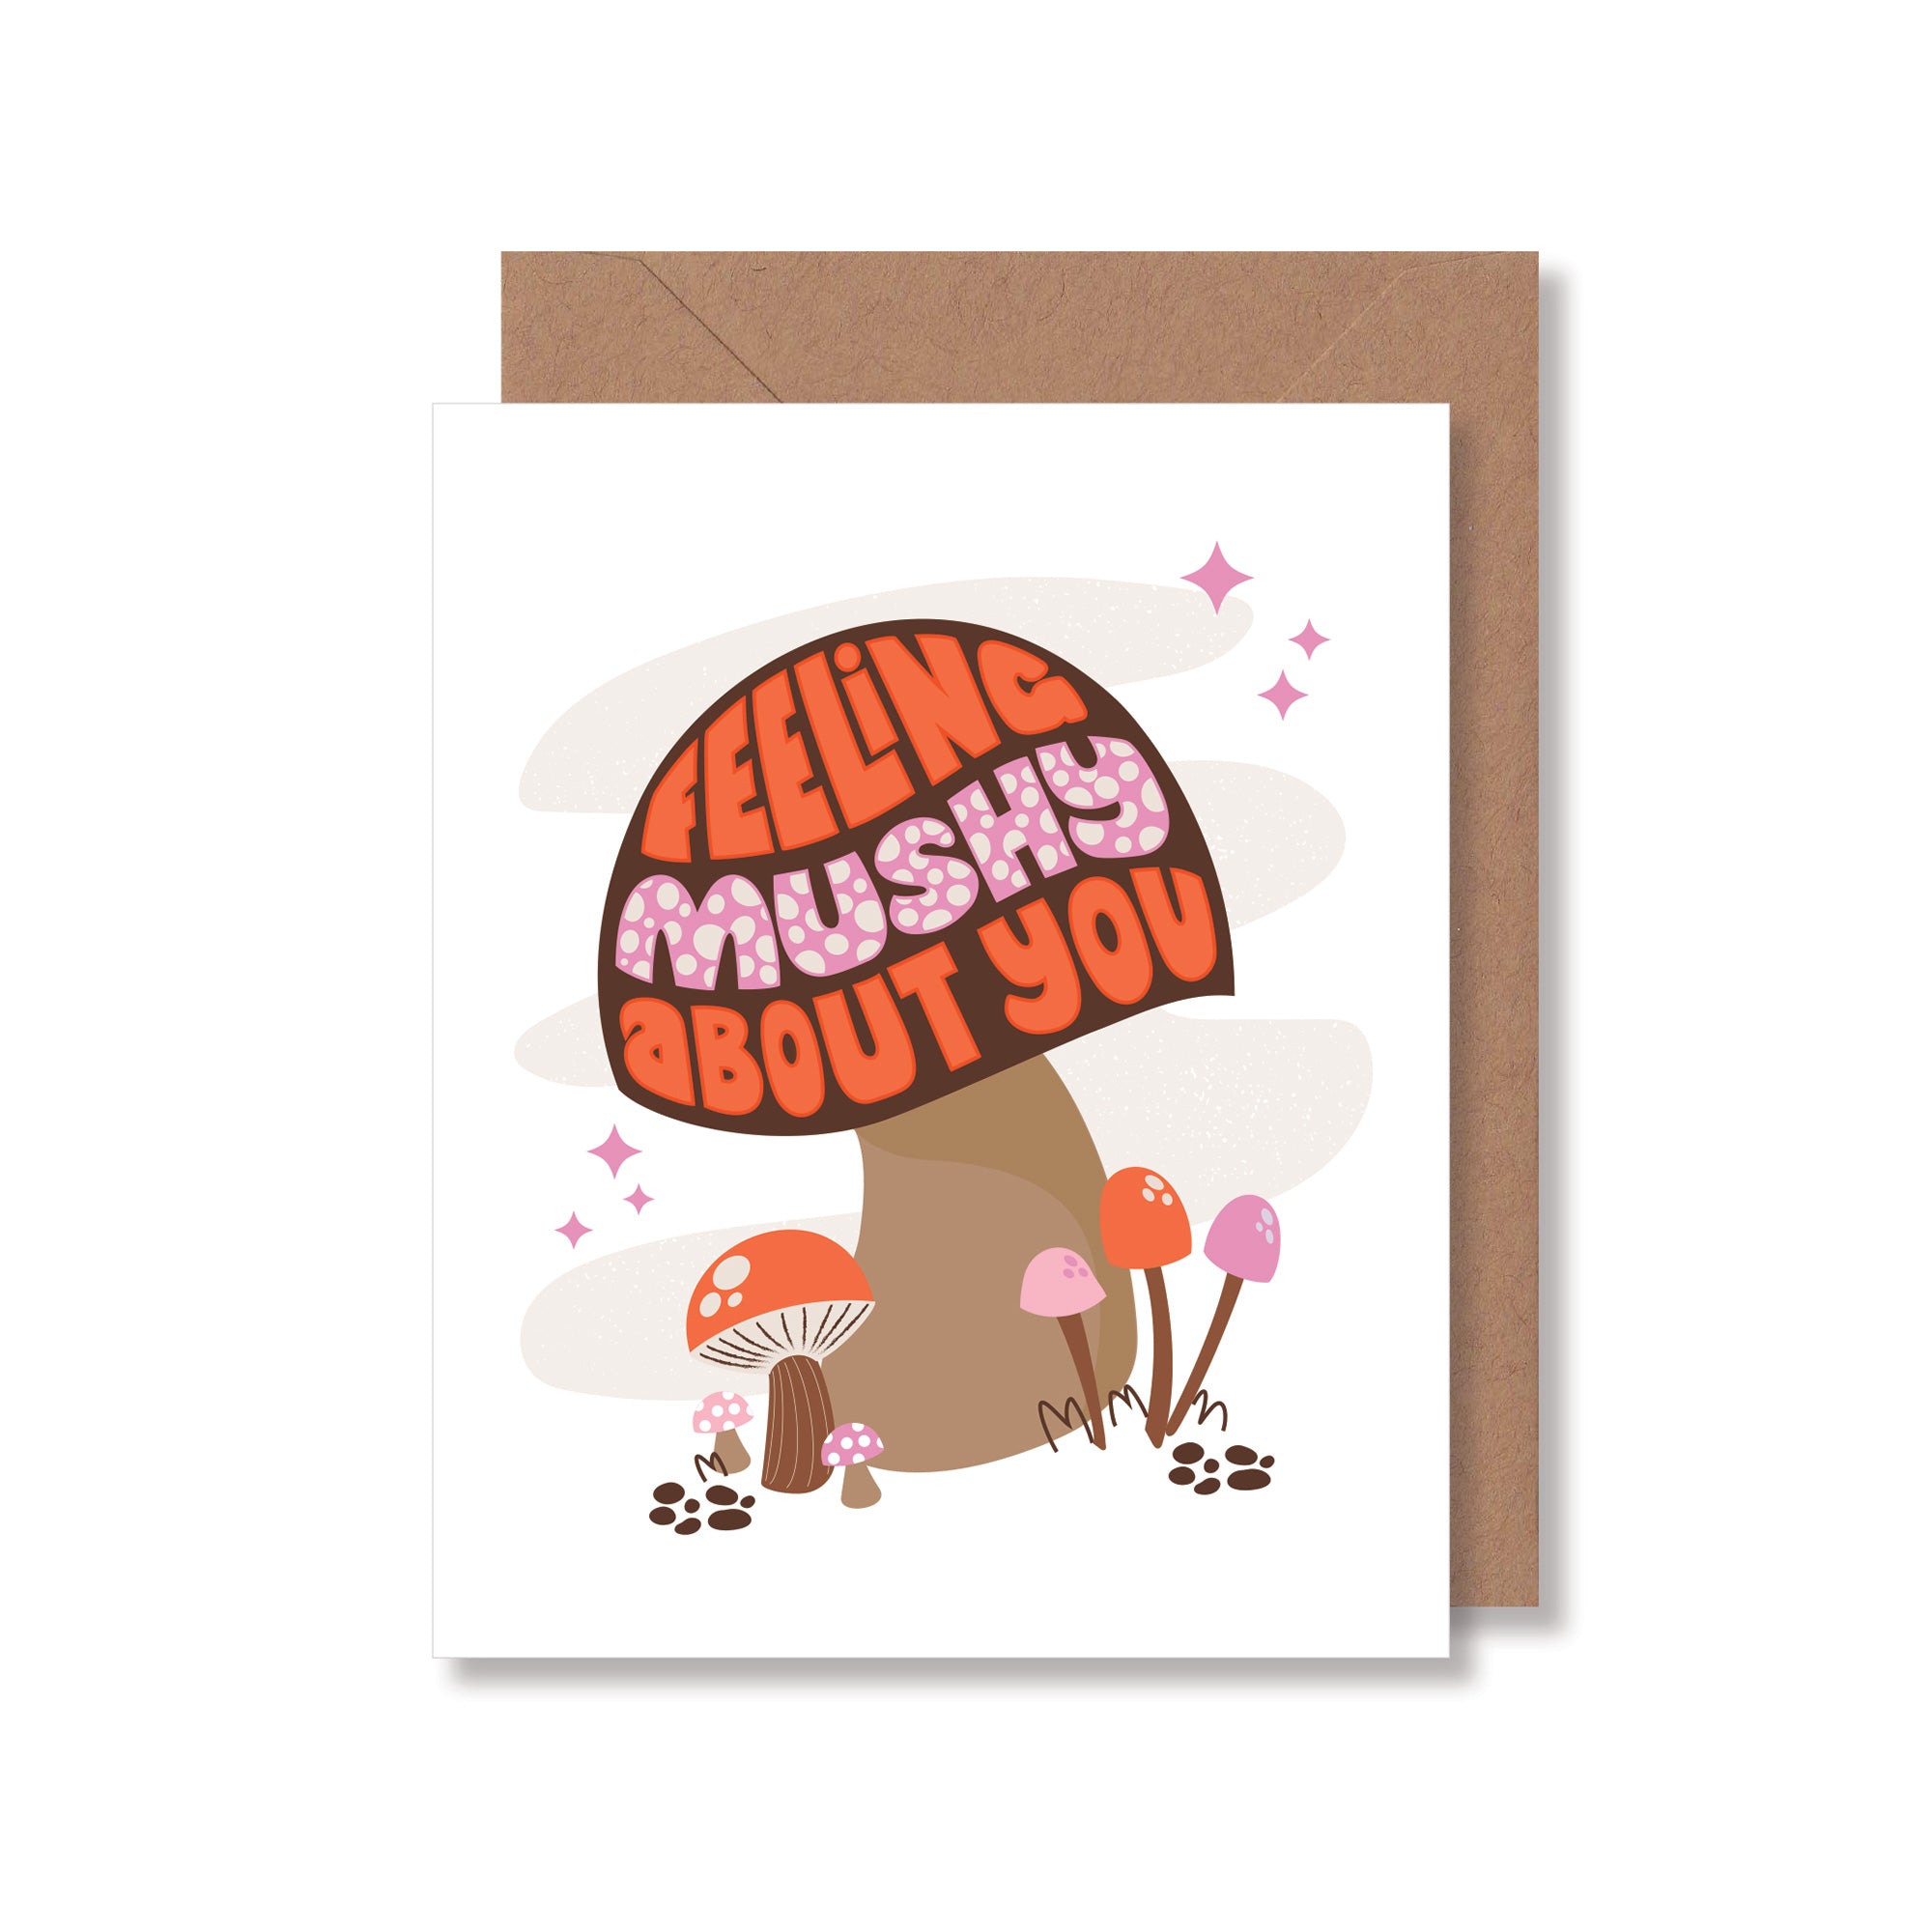 Love card with hand-lettering and fun mushroom illustration feeling mushy about you by Gigglemugg